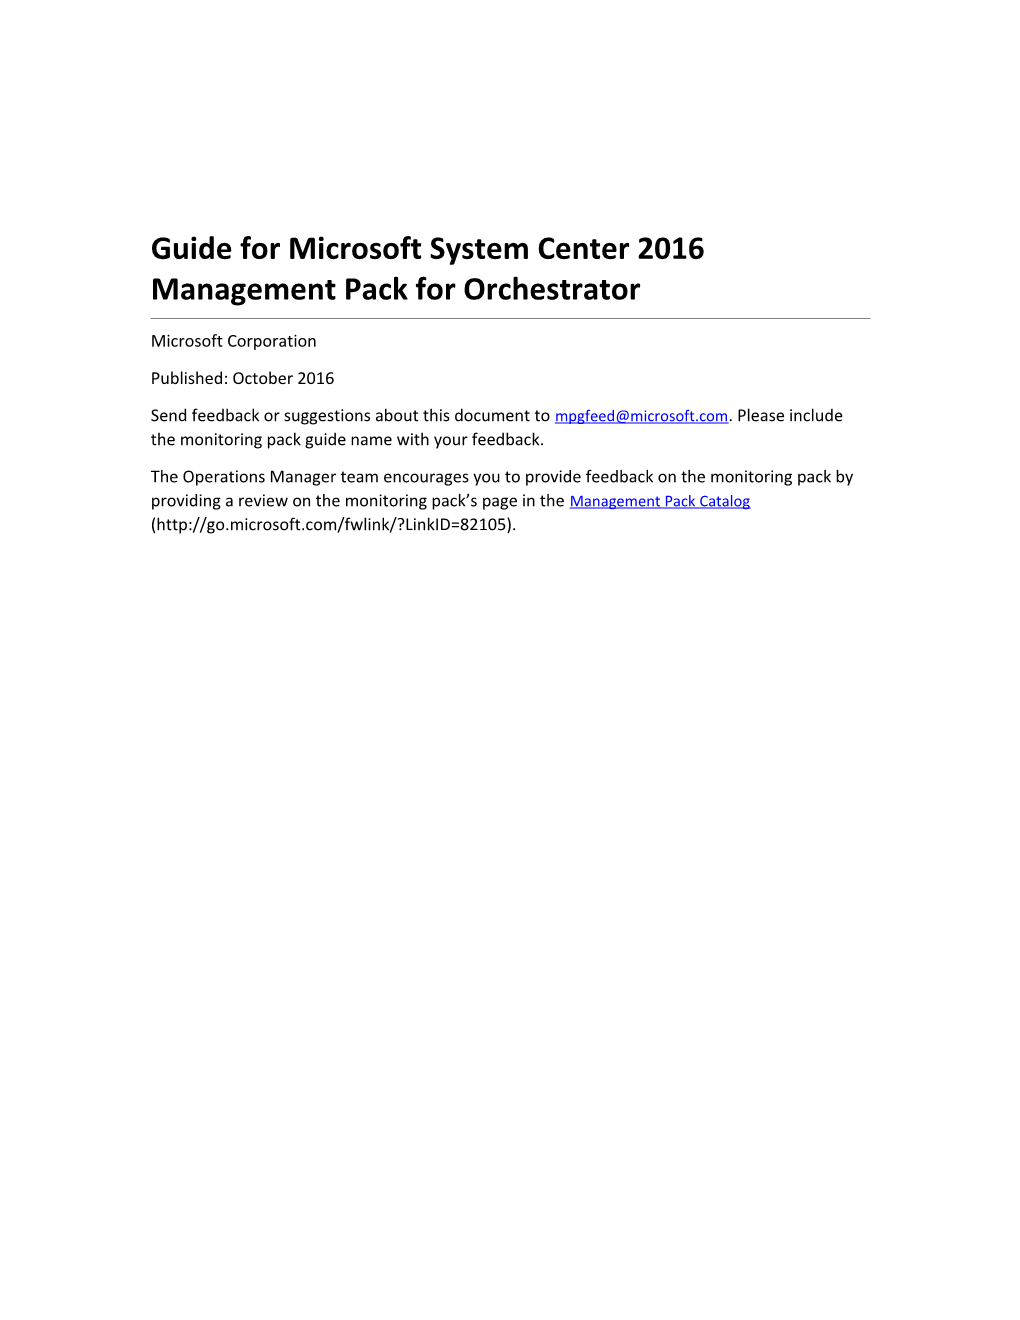 Guide for Microsoft System Center 2016 Management Pack Fororchestrator